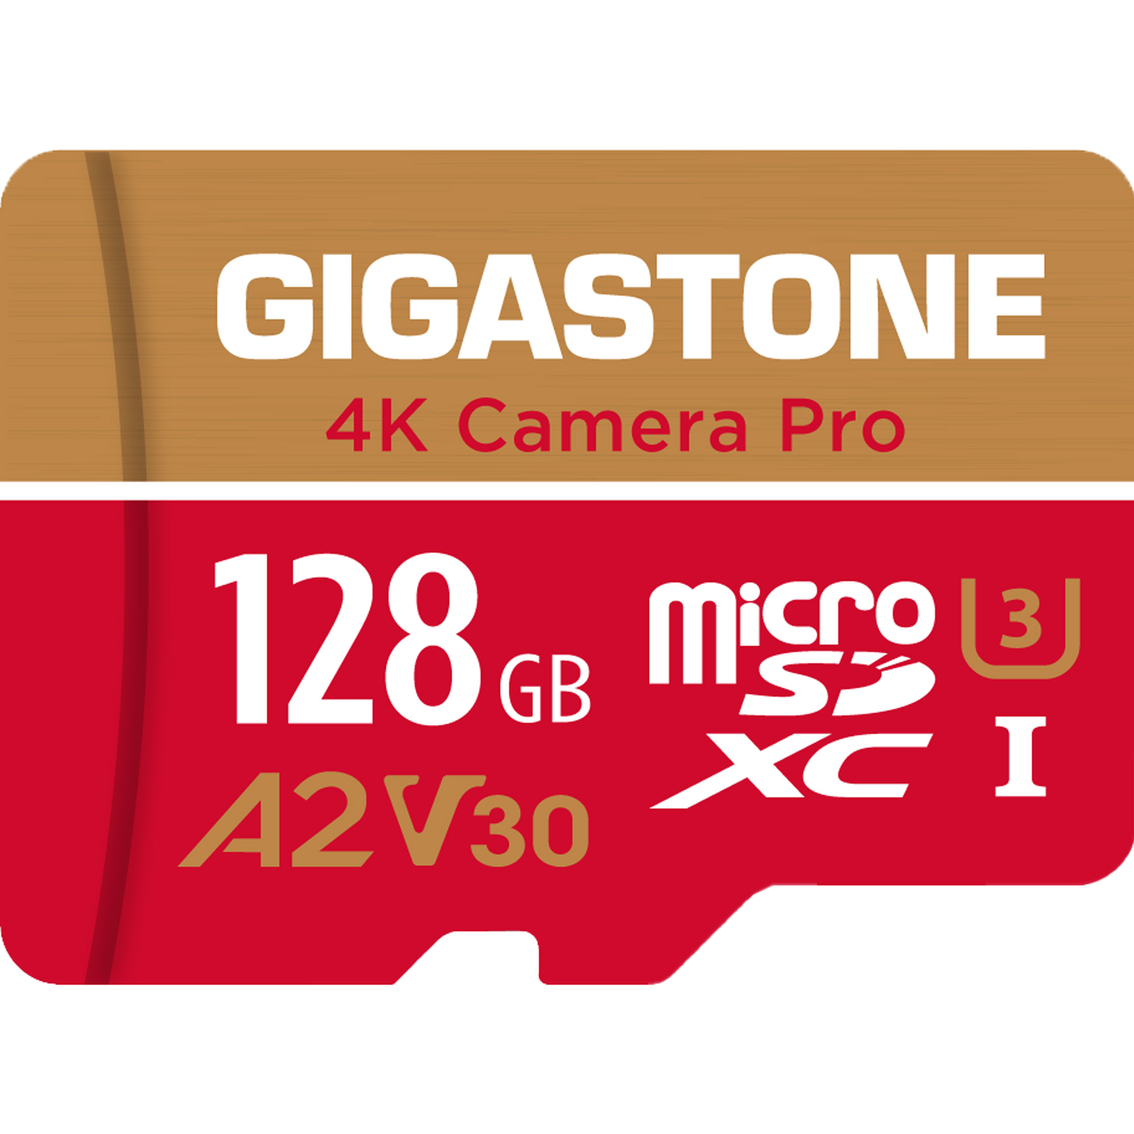 Gigastone MicroSD A2 V30 128GB with SD Adapter - Image 2 of 2